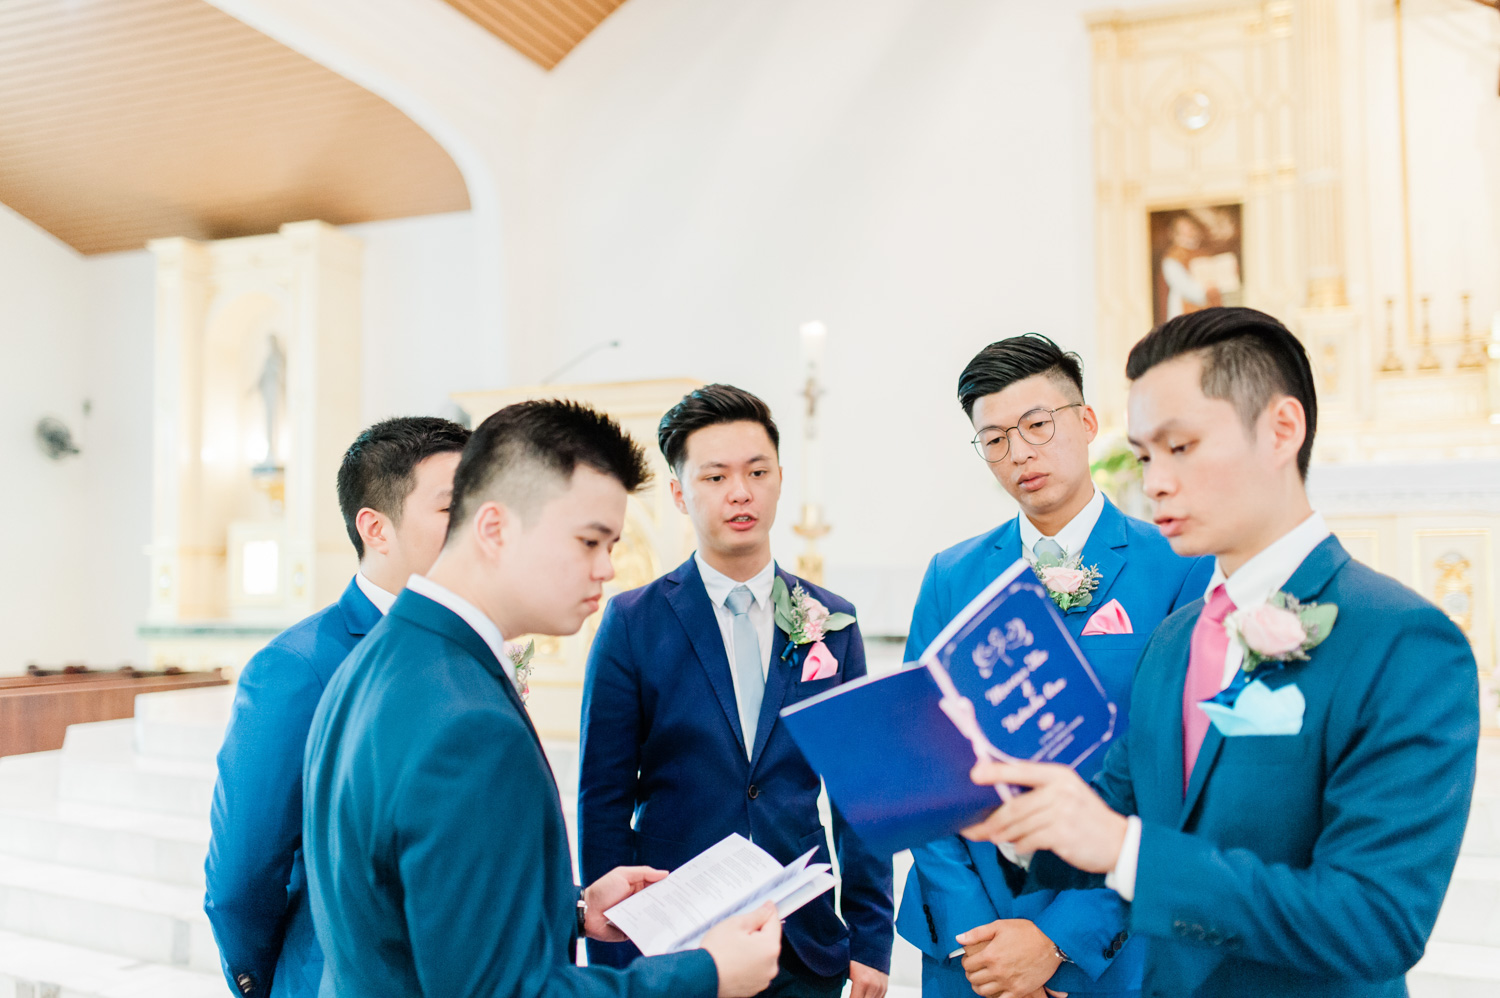 sfx-church-st-francis-xavier-kuala-lumpur-wedding-actual-day-mixed-couple-marriage-candid-blue-themed